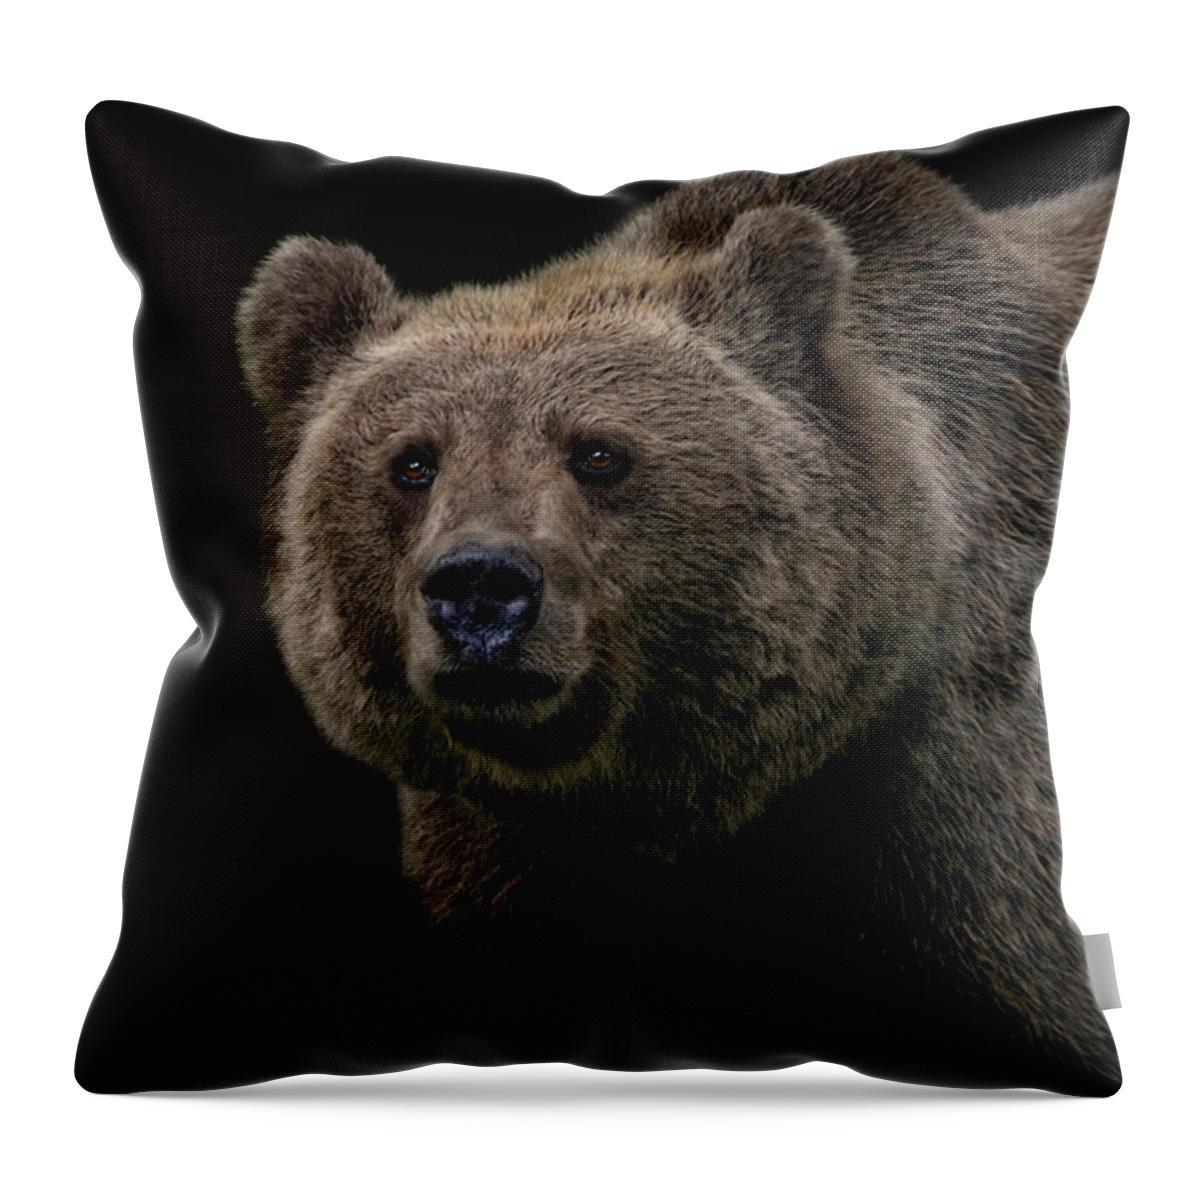 Portrait Throw Pillow featuring the photograph Not A Cuddly Toy Bear by Joachim G Pinkawa